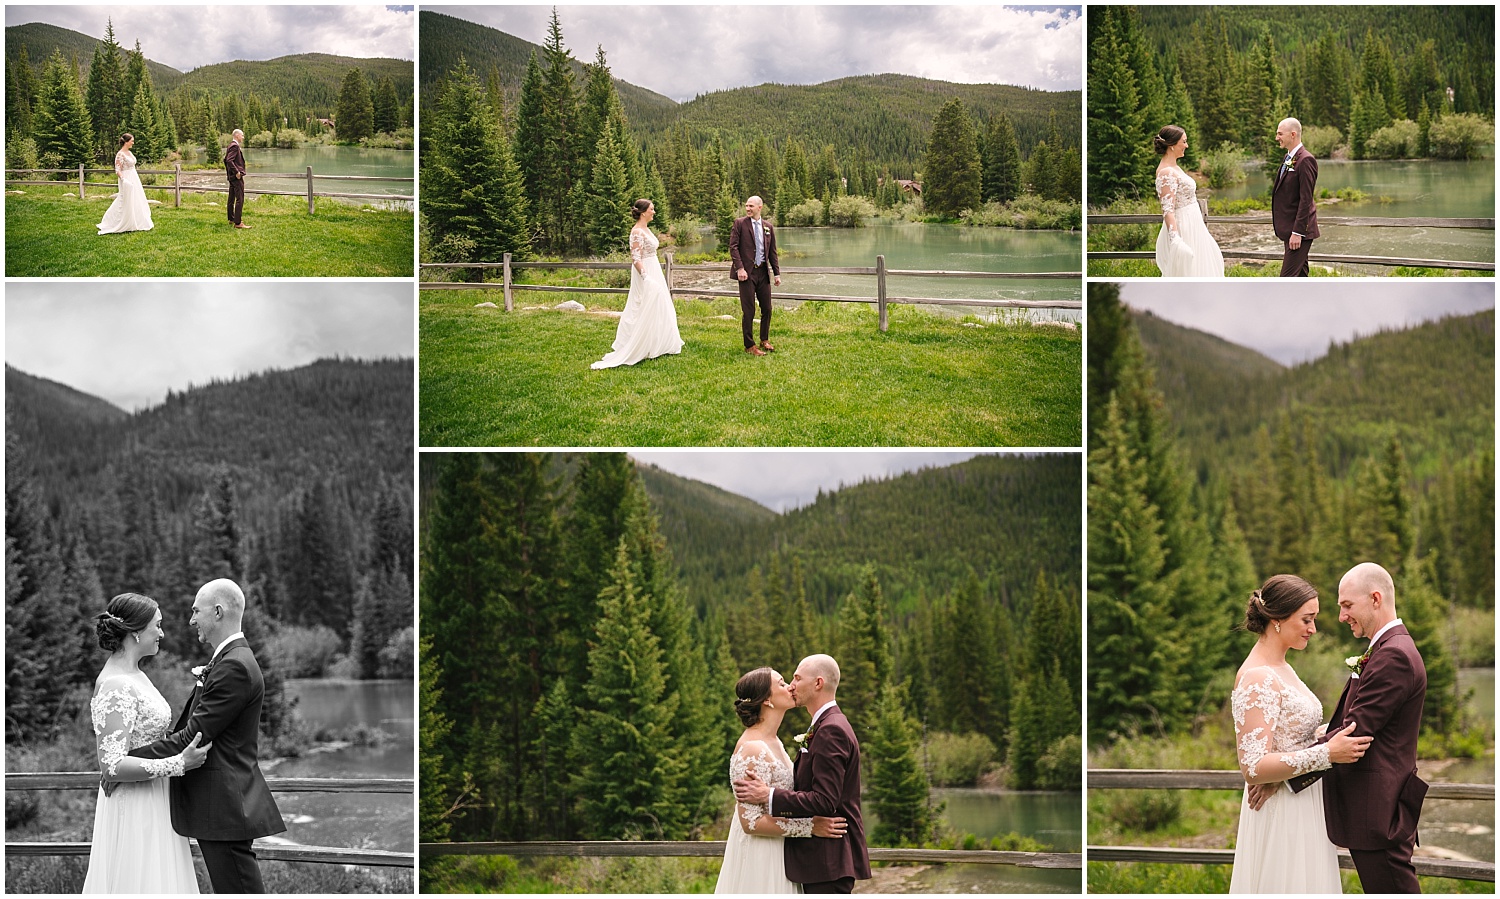 Bride and groom first look in front of the water at Ski Tip Lodge wedding in Keystone Colorado